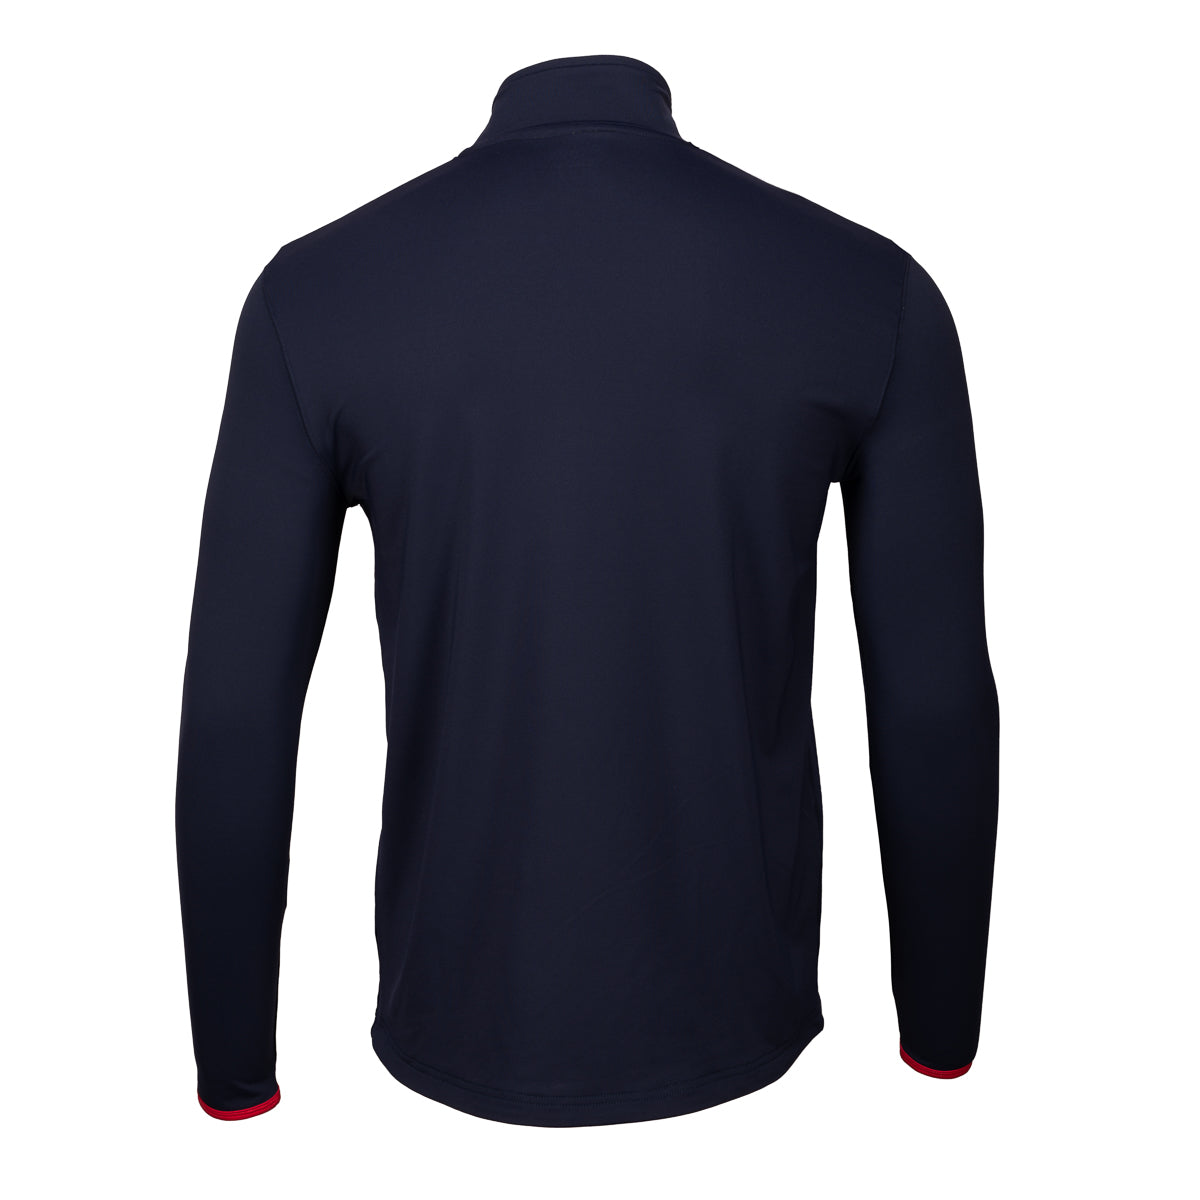 2022 Match Day Warm up 1/4 Zip - Navy/Red - Adult - (2223)